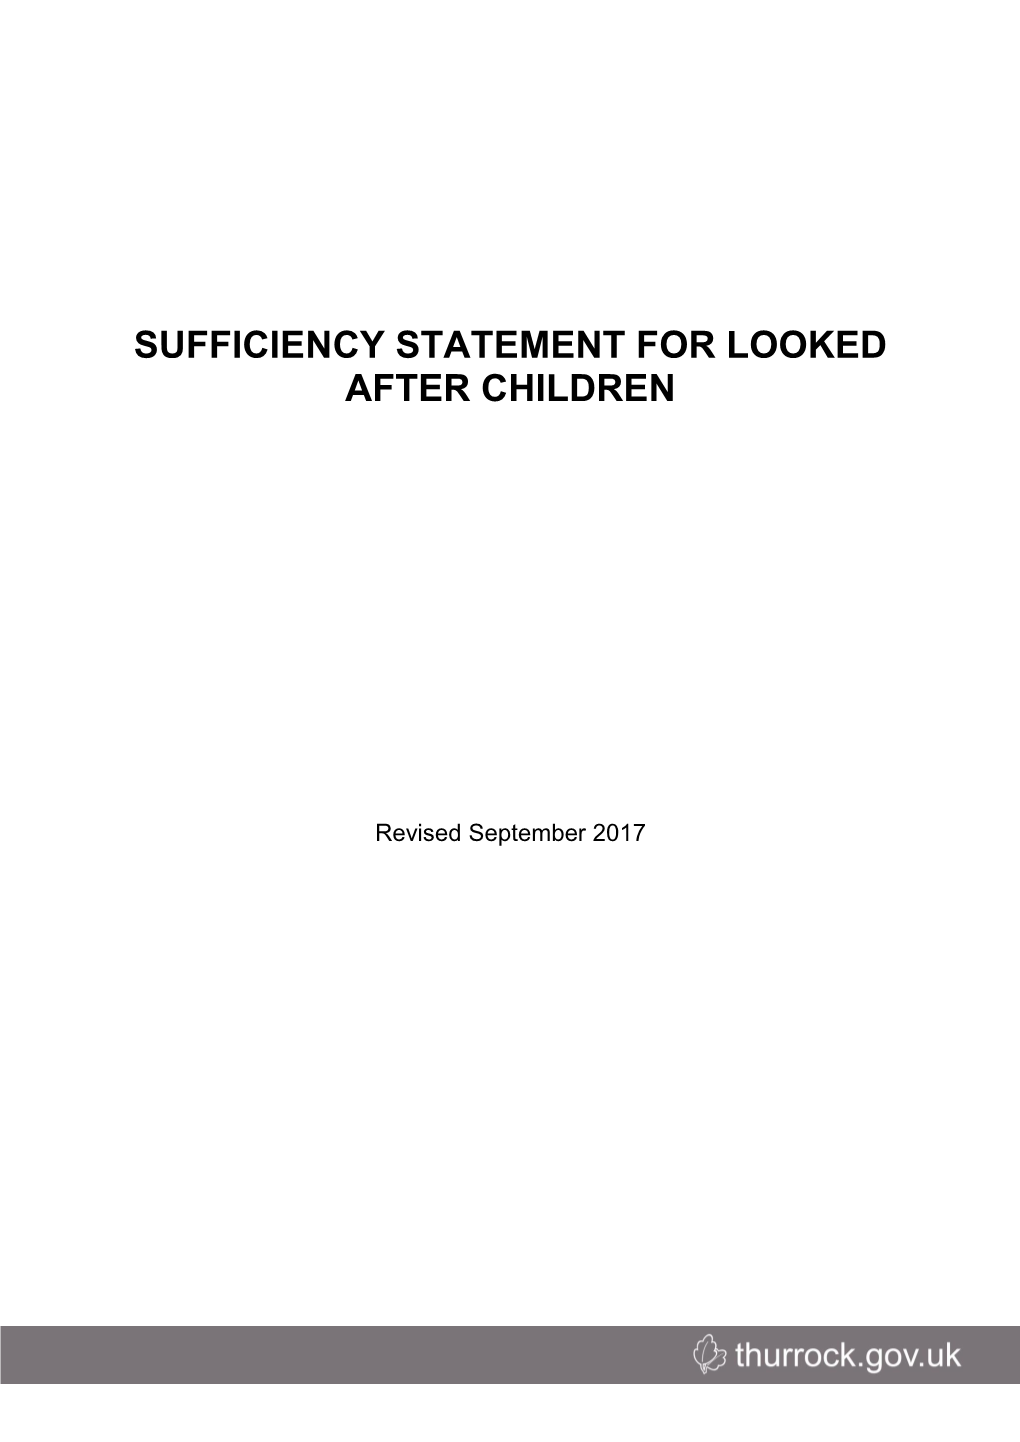 Sufficiency Statement for Looked After Children